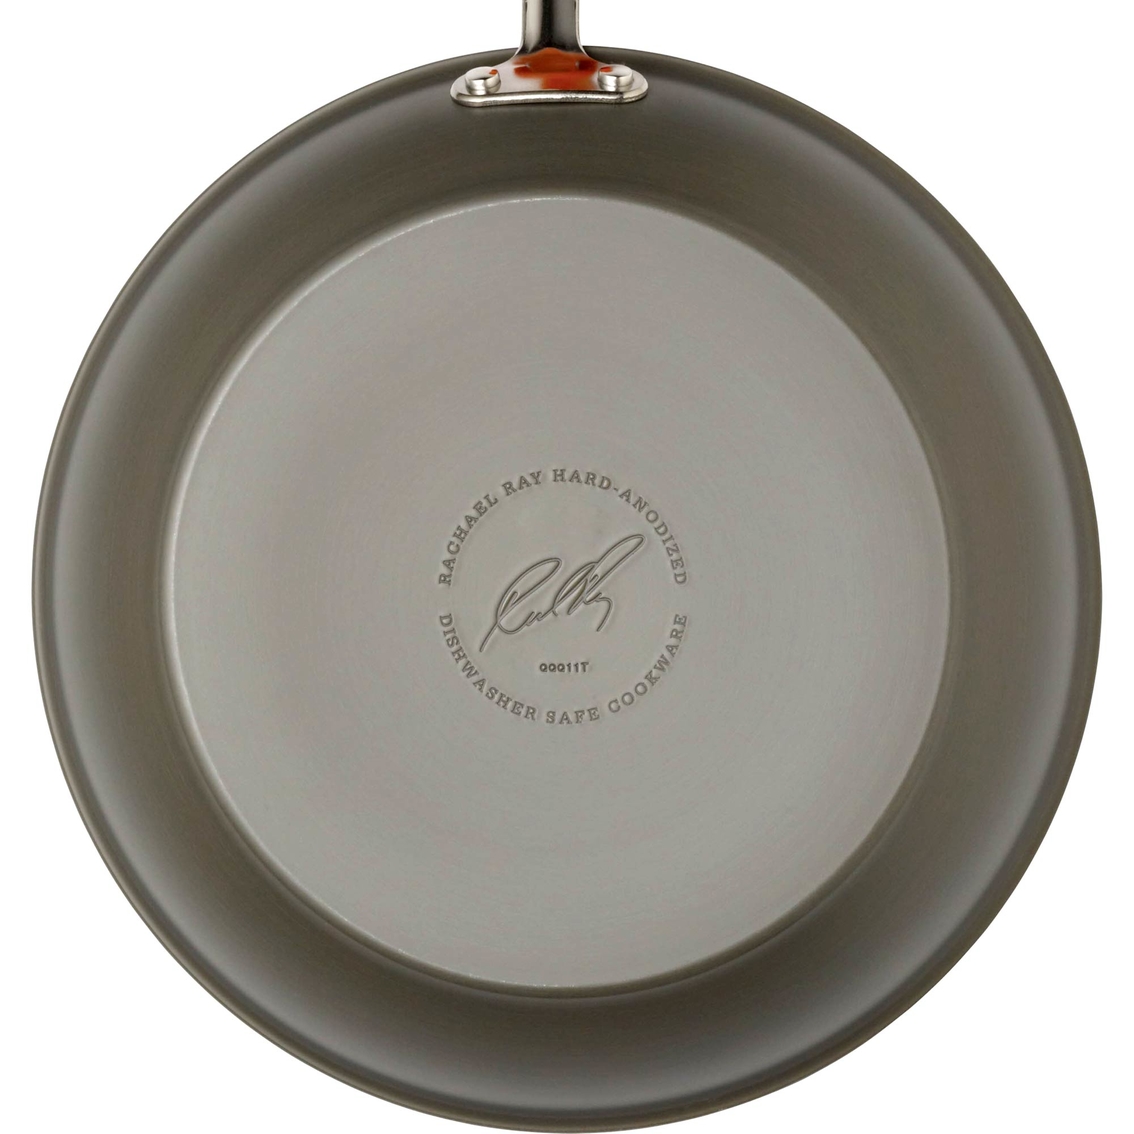 Rachael Ray Hard Anodized Nonstick 10 In. Skillet - Image 3 of 4